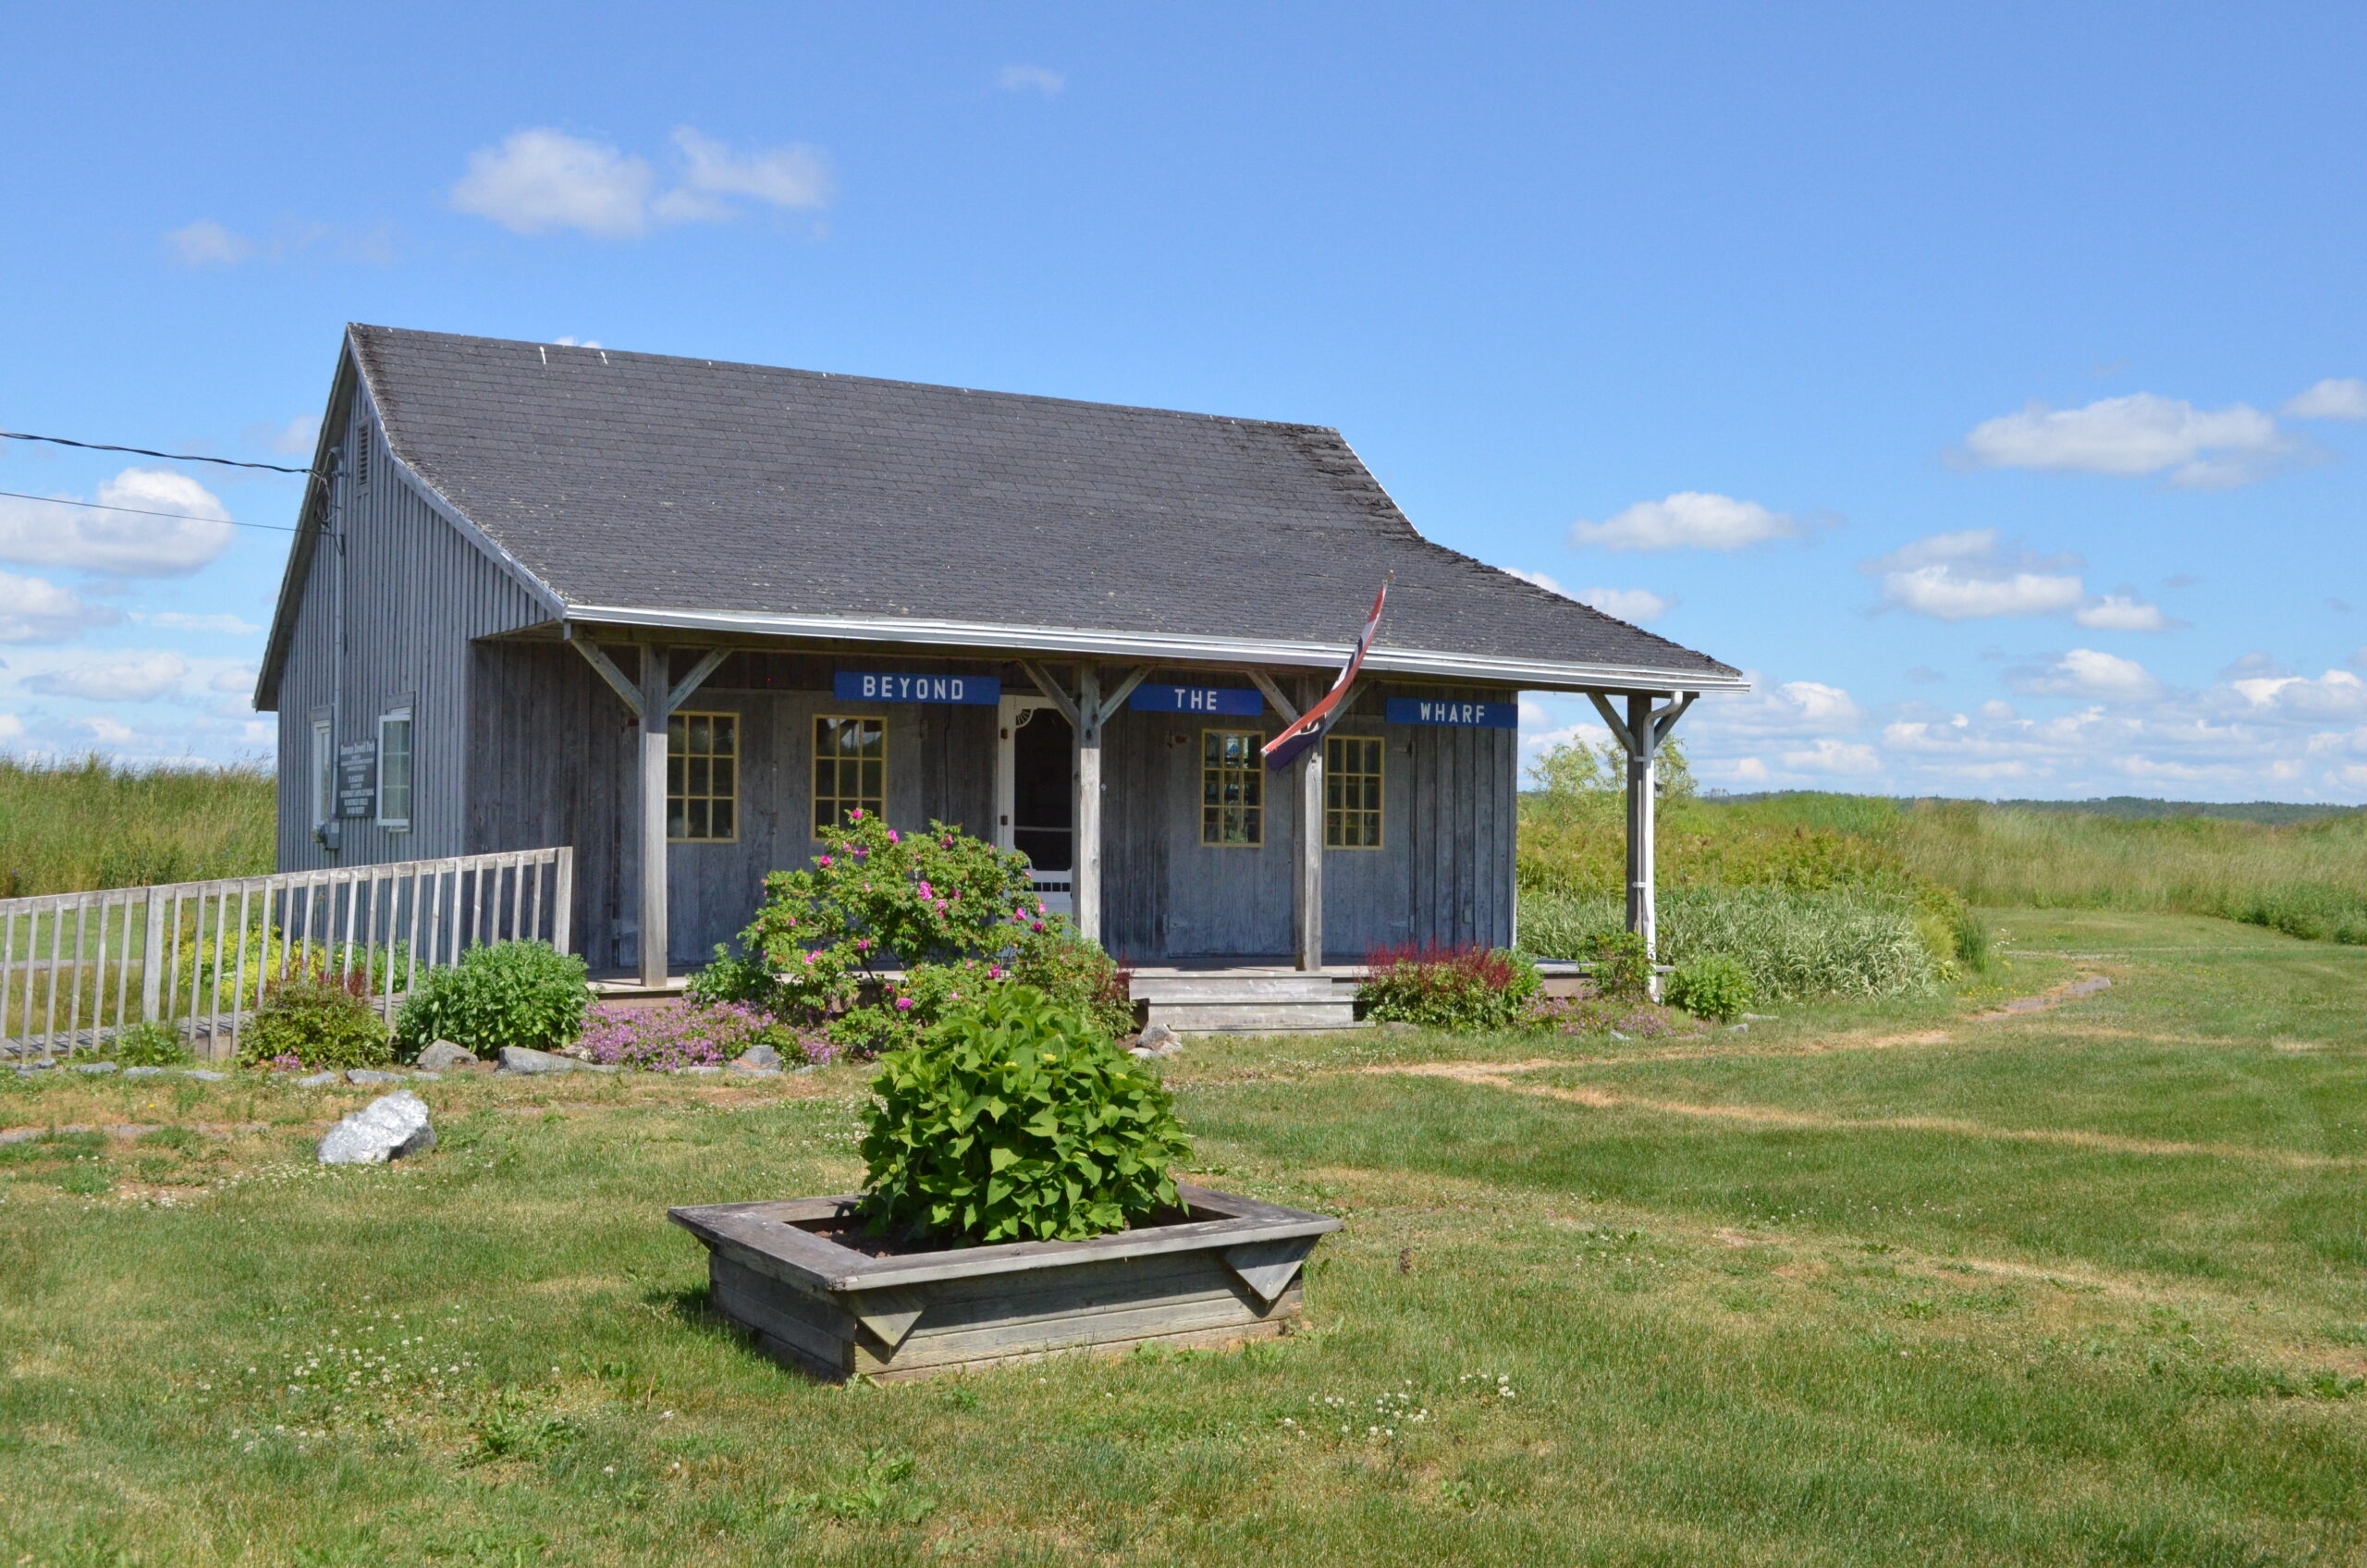 A rustic blue building with a covered porch and decorative shrubs.